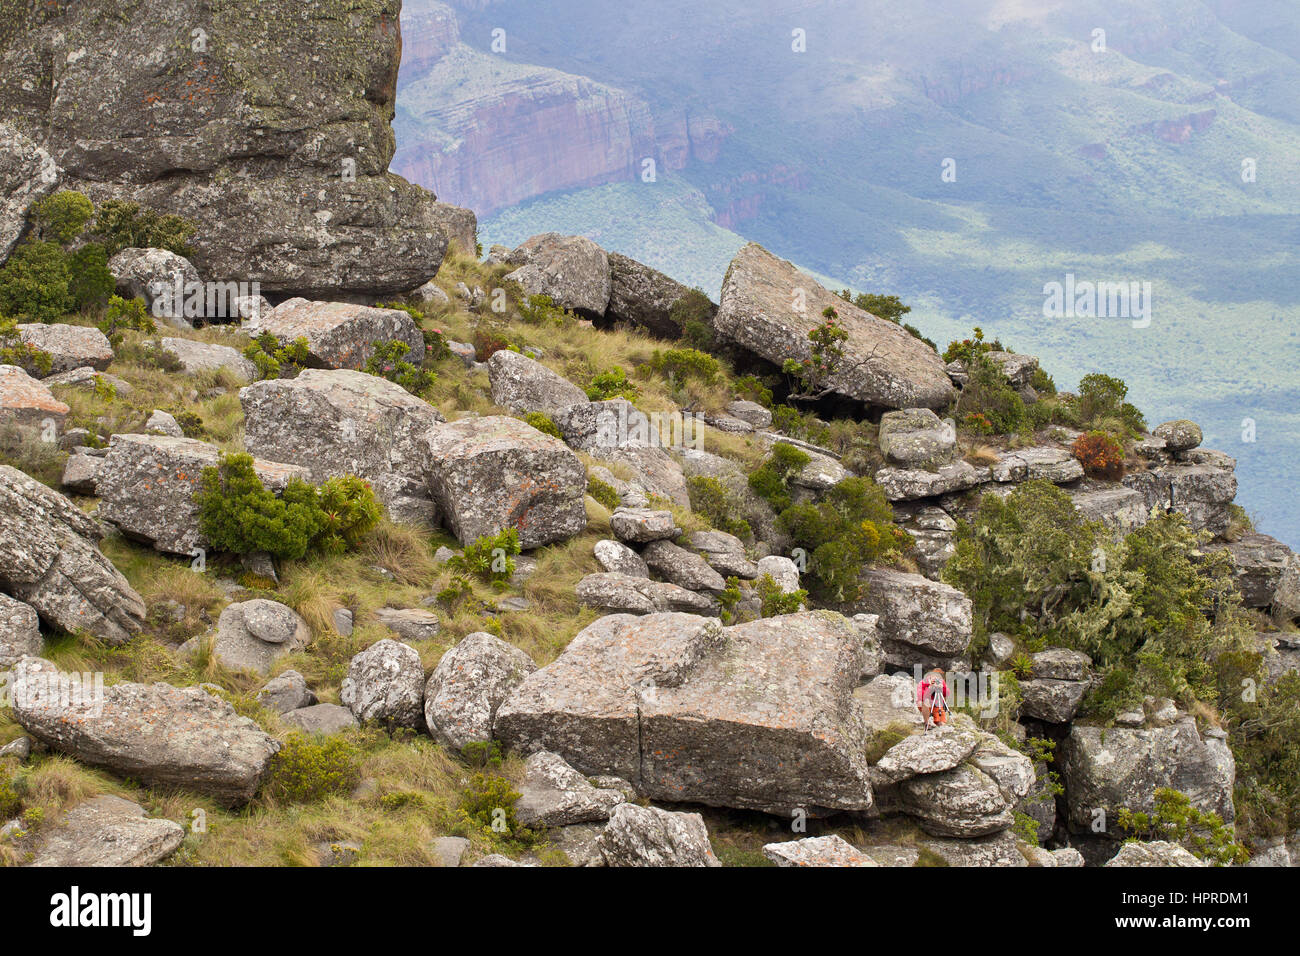 A photographer sets up a tripod for a picture in the picturesque landscape of Mariepskop mountain in South Africa. Stock Photo